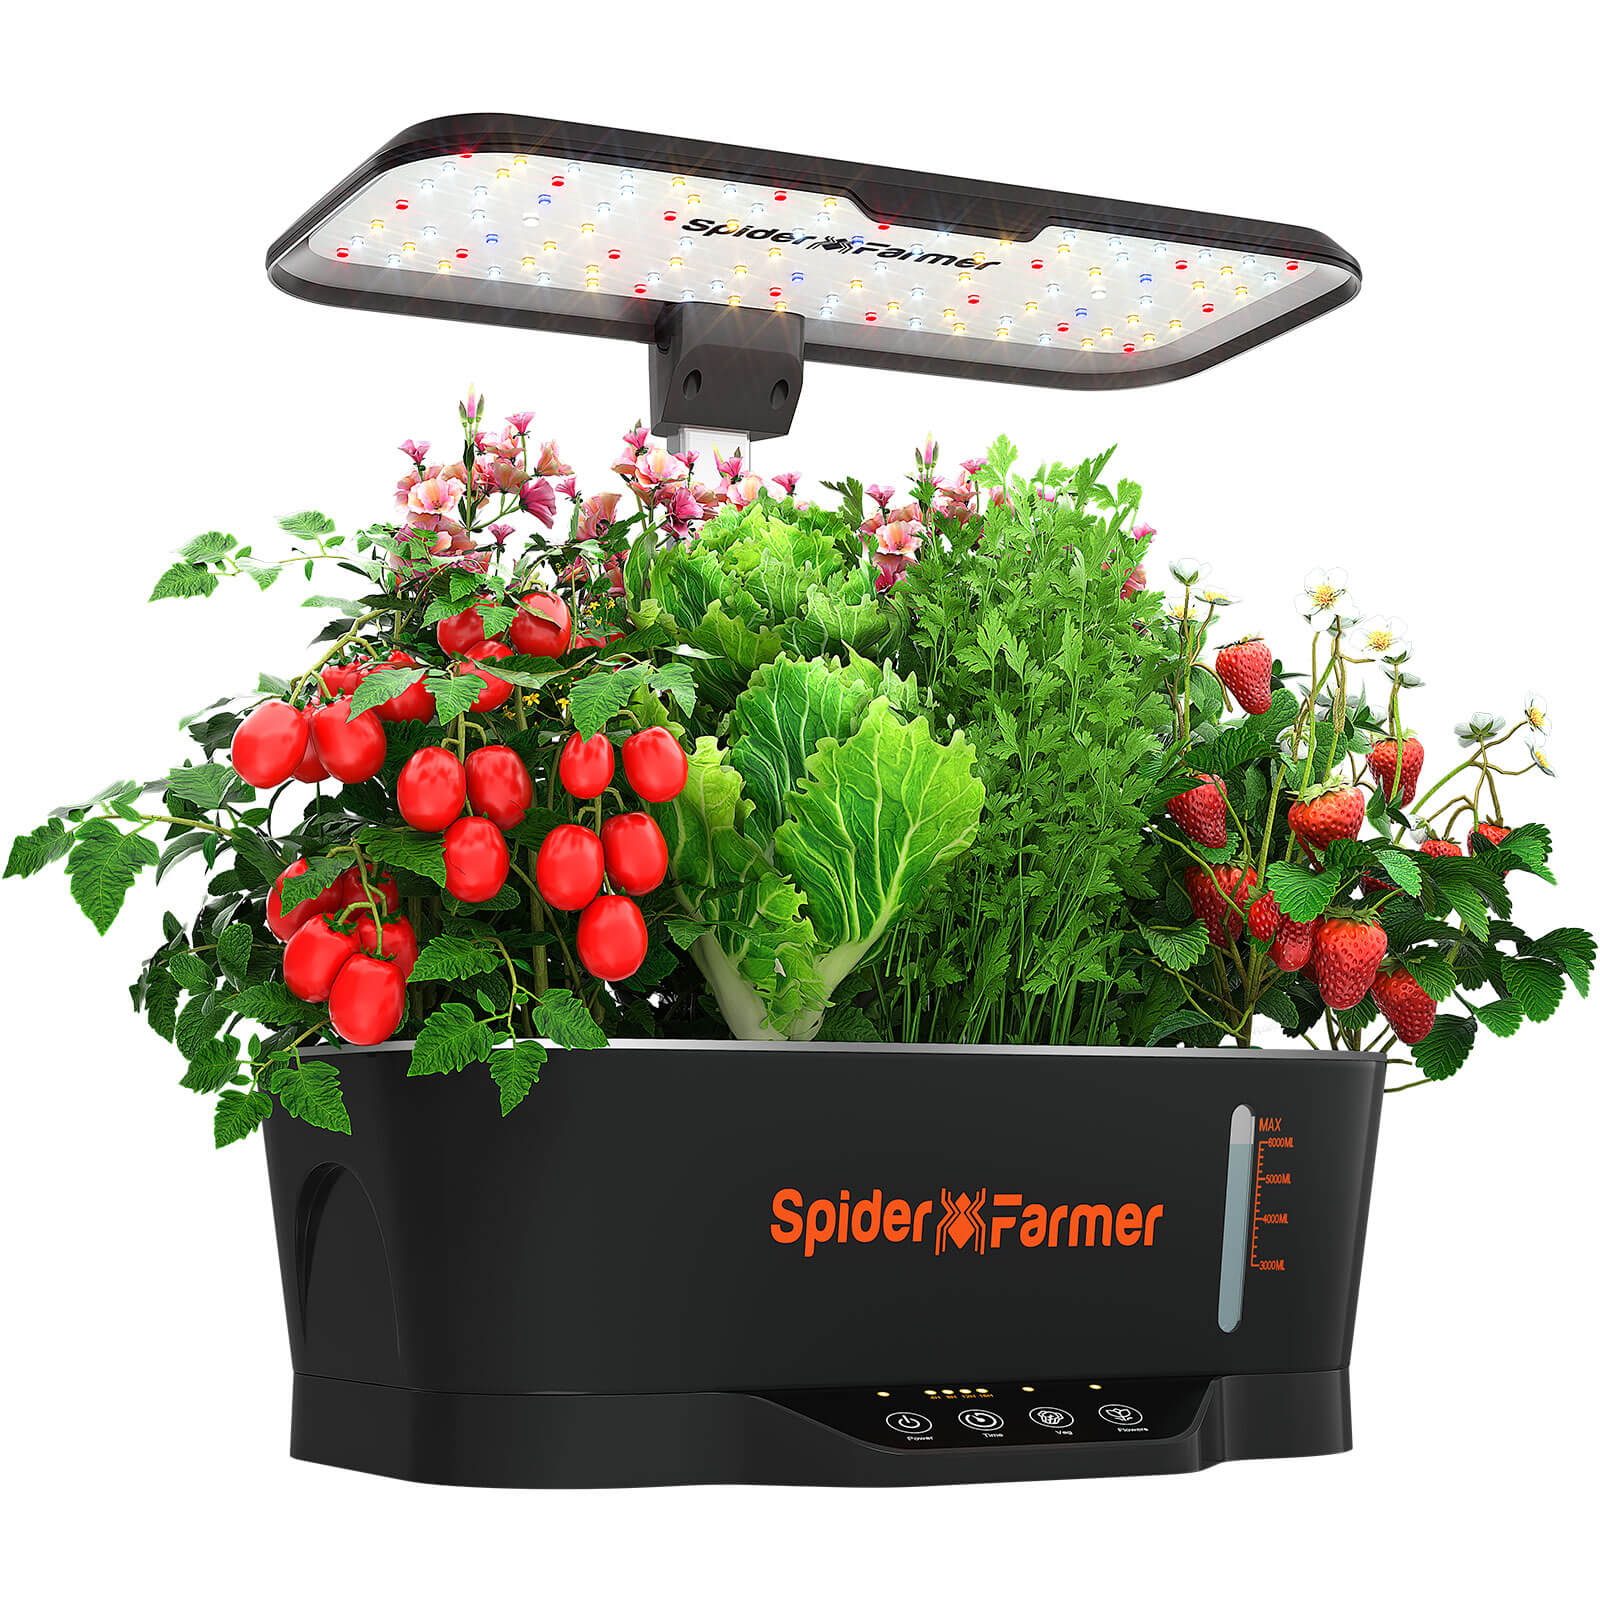 Grow plants indoors with the Spider Farmer Smart G12 Indoor Hydroponic Grow System